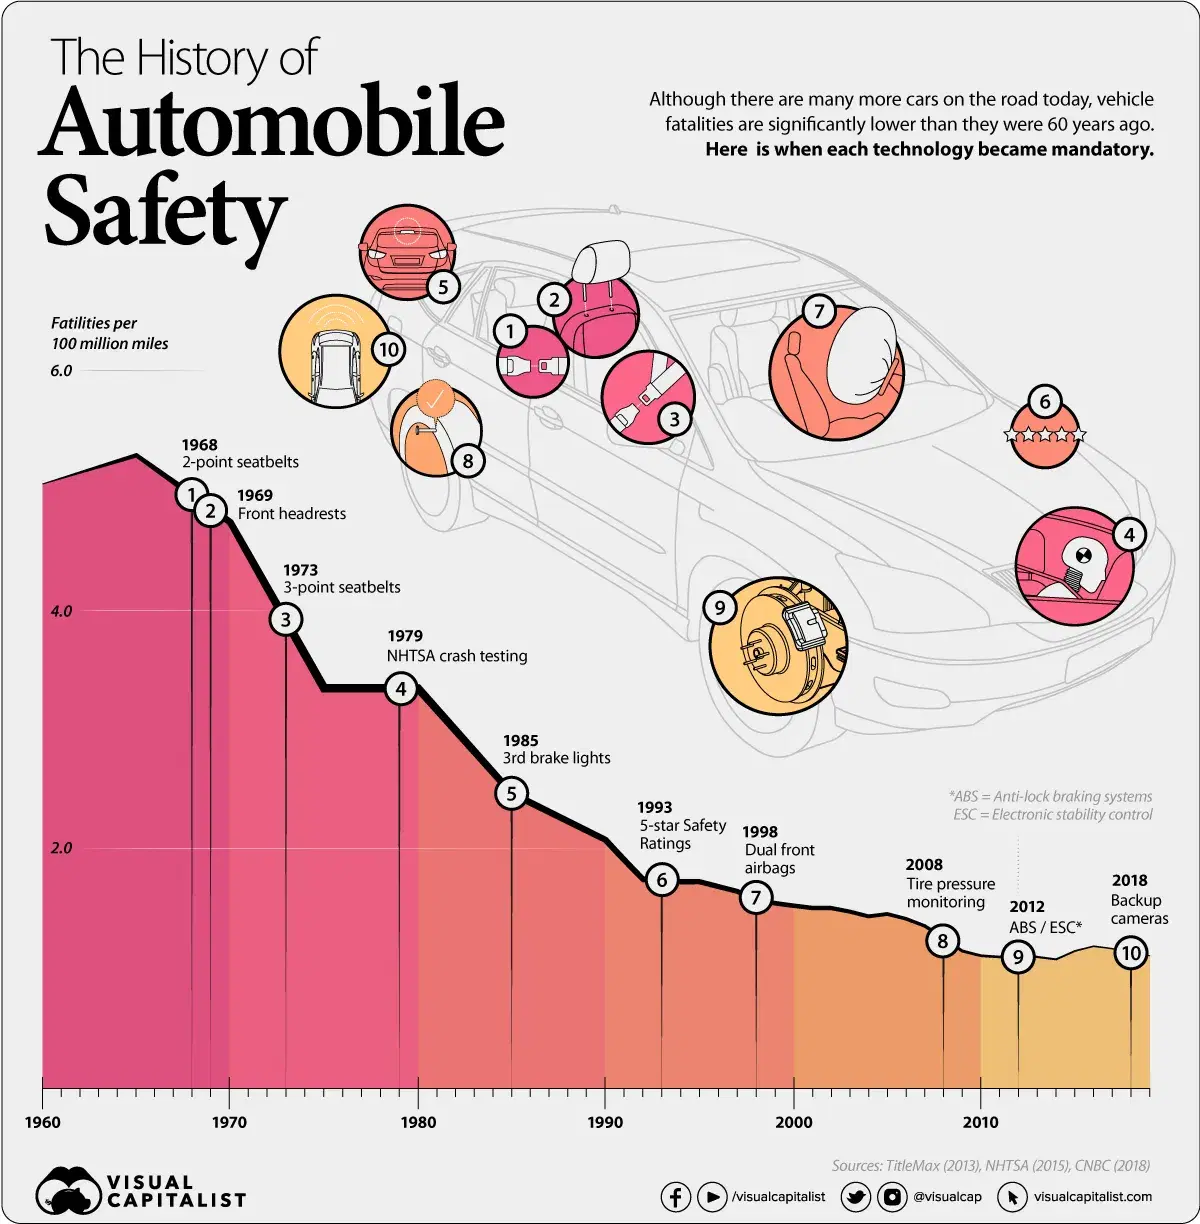 How Has Car Safety Improved Over 60 Years?